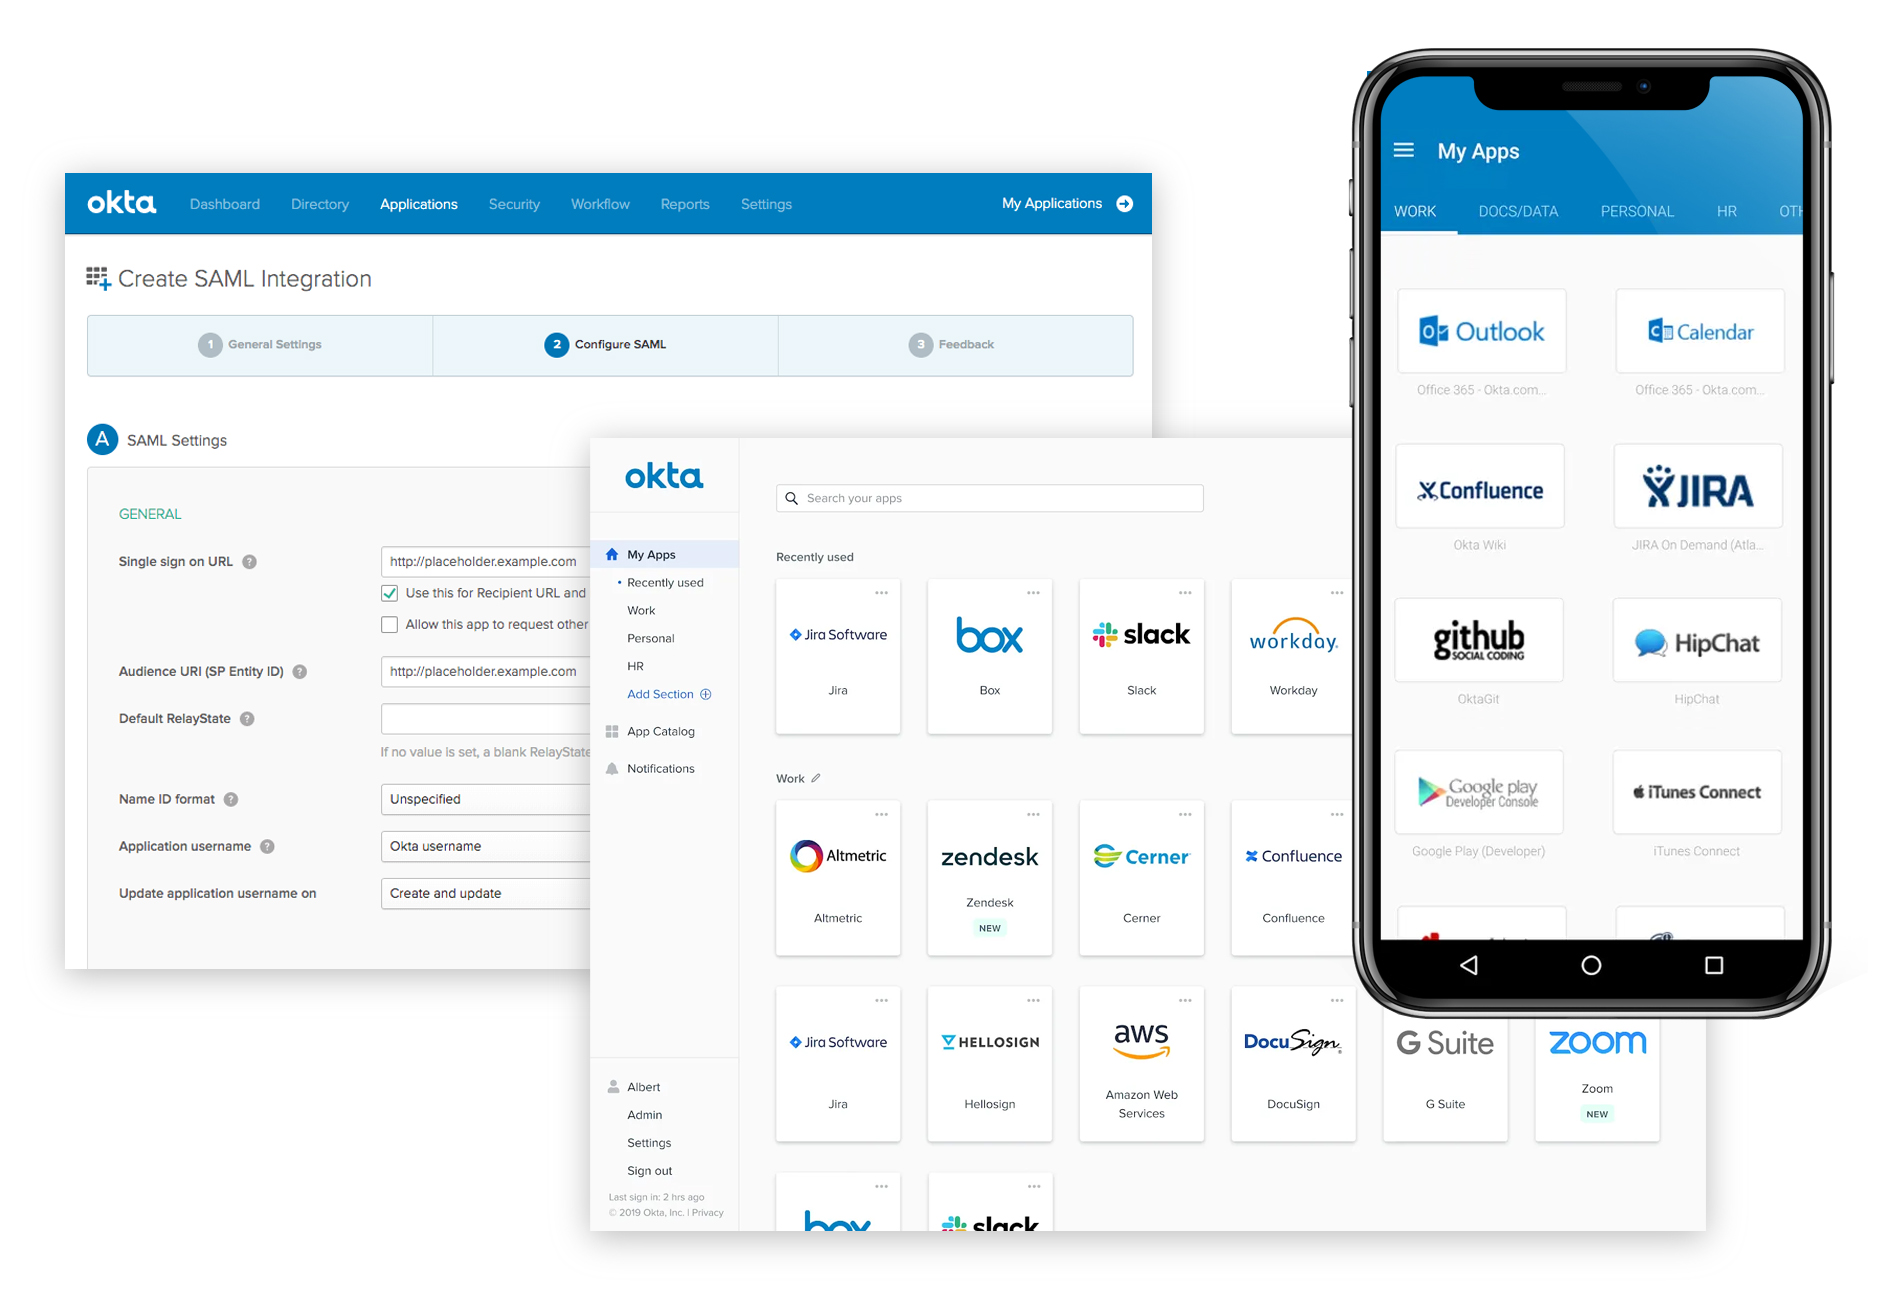 Okta featured image - a collection of screenshots showing the login capabilities with multiple app brands, as well as an inset of a mobile device with the mobile login screen featured Image